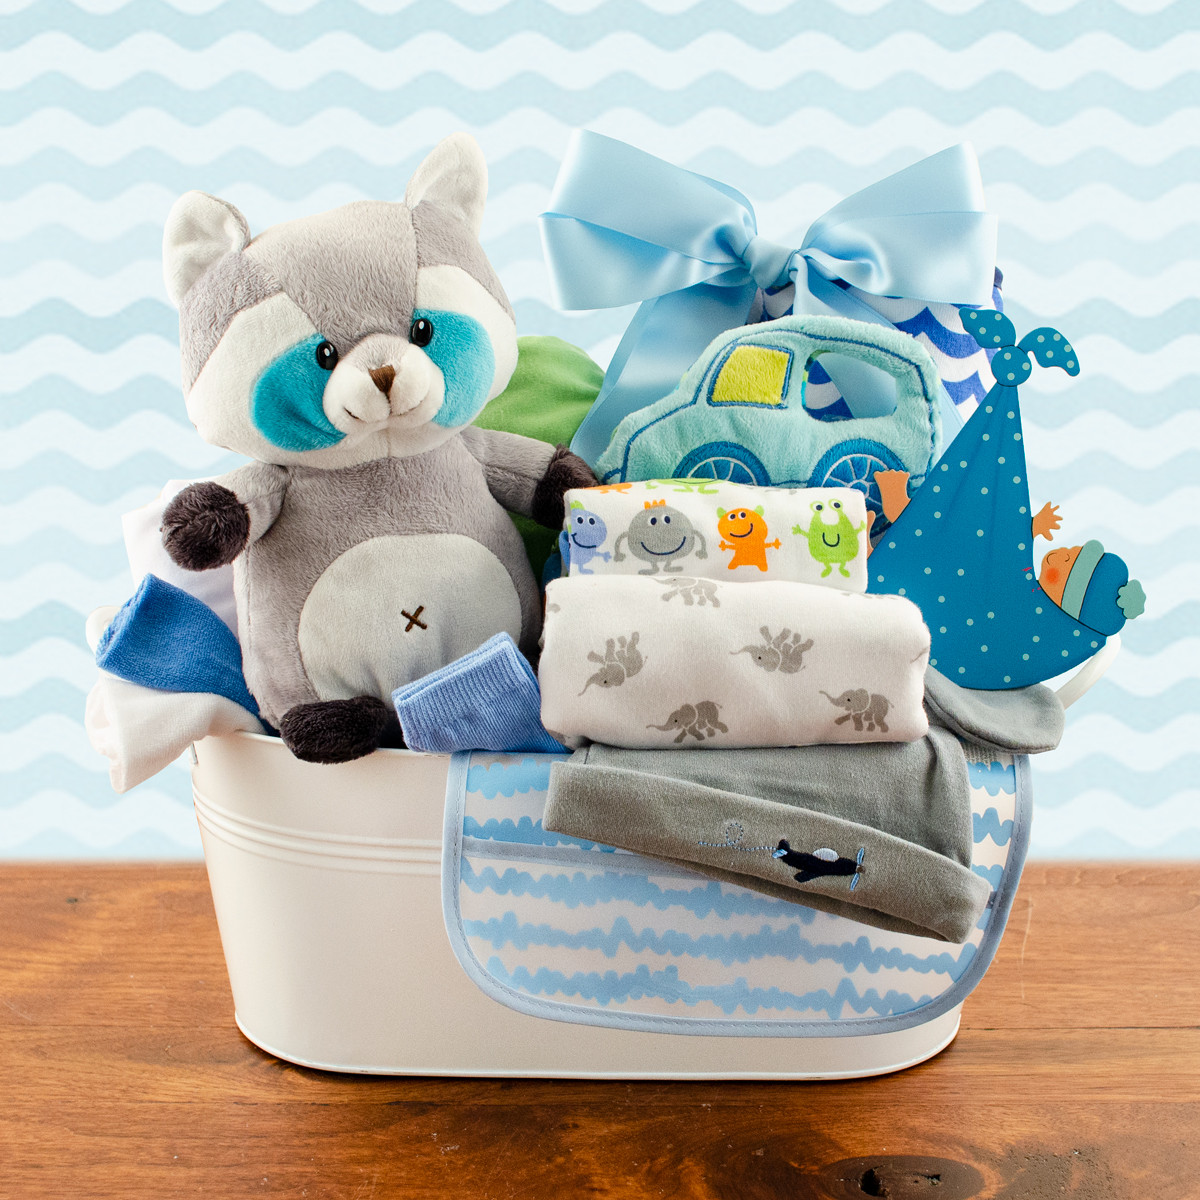 Welcome Home: Baby Boy Gift Basket - Gift Baskets for Delivery